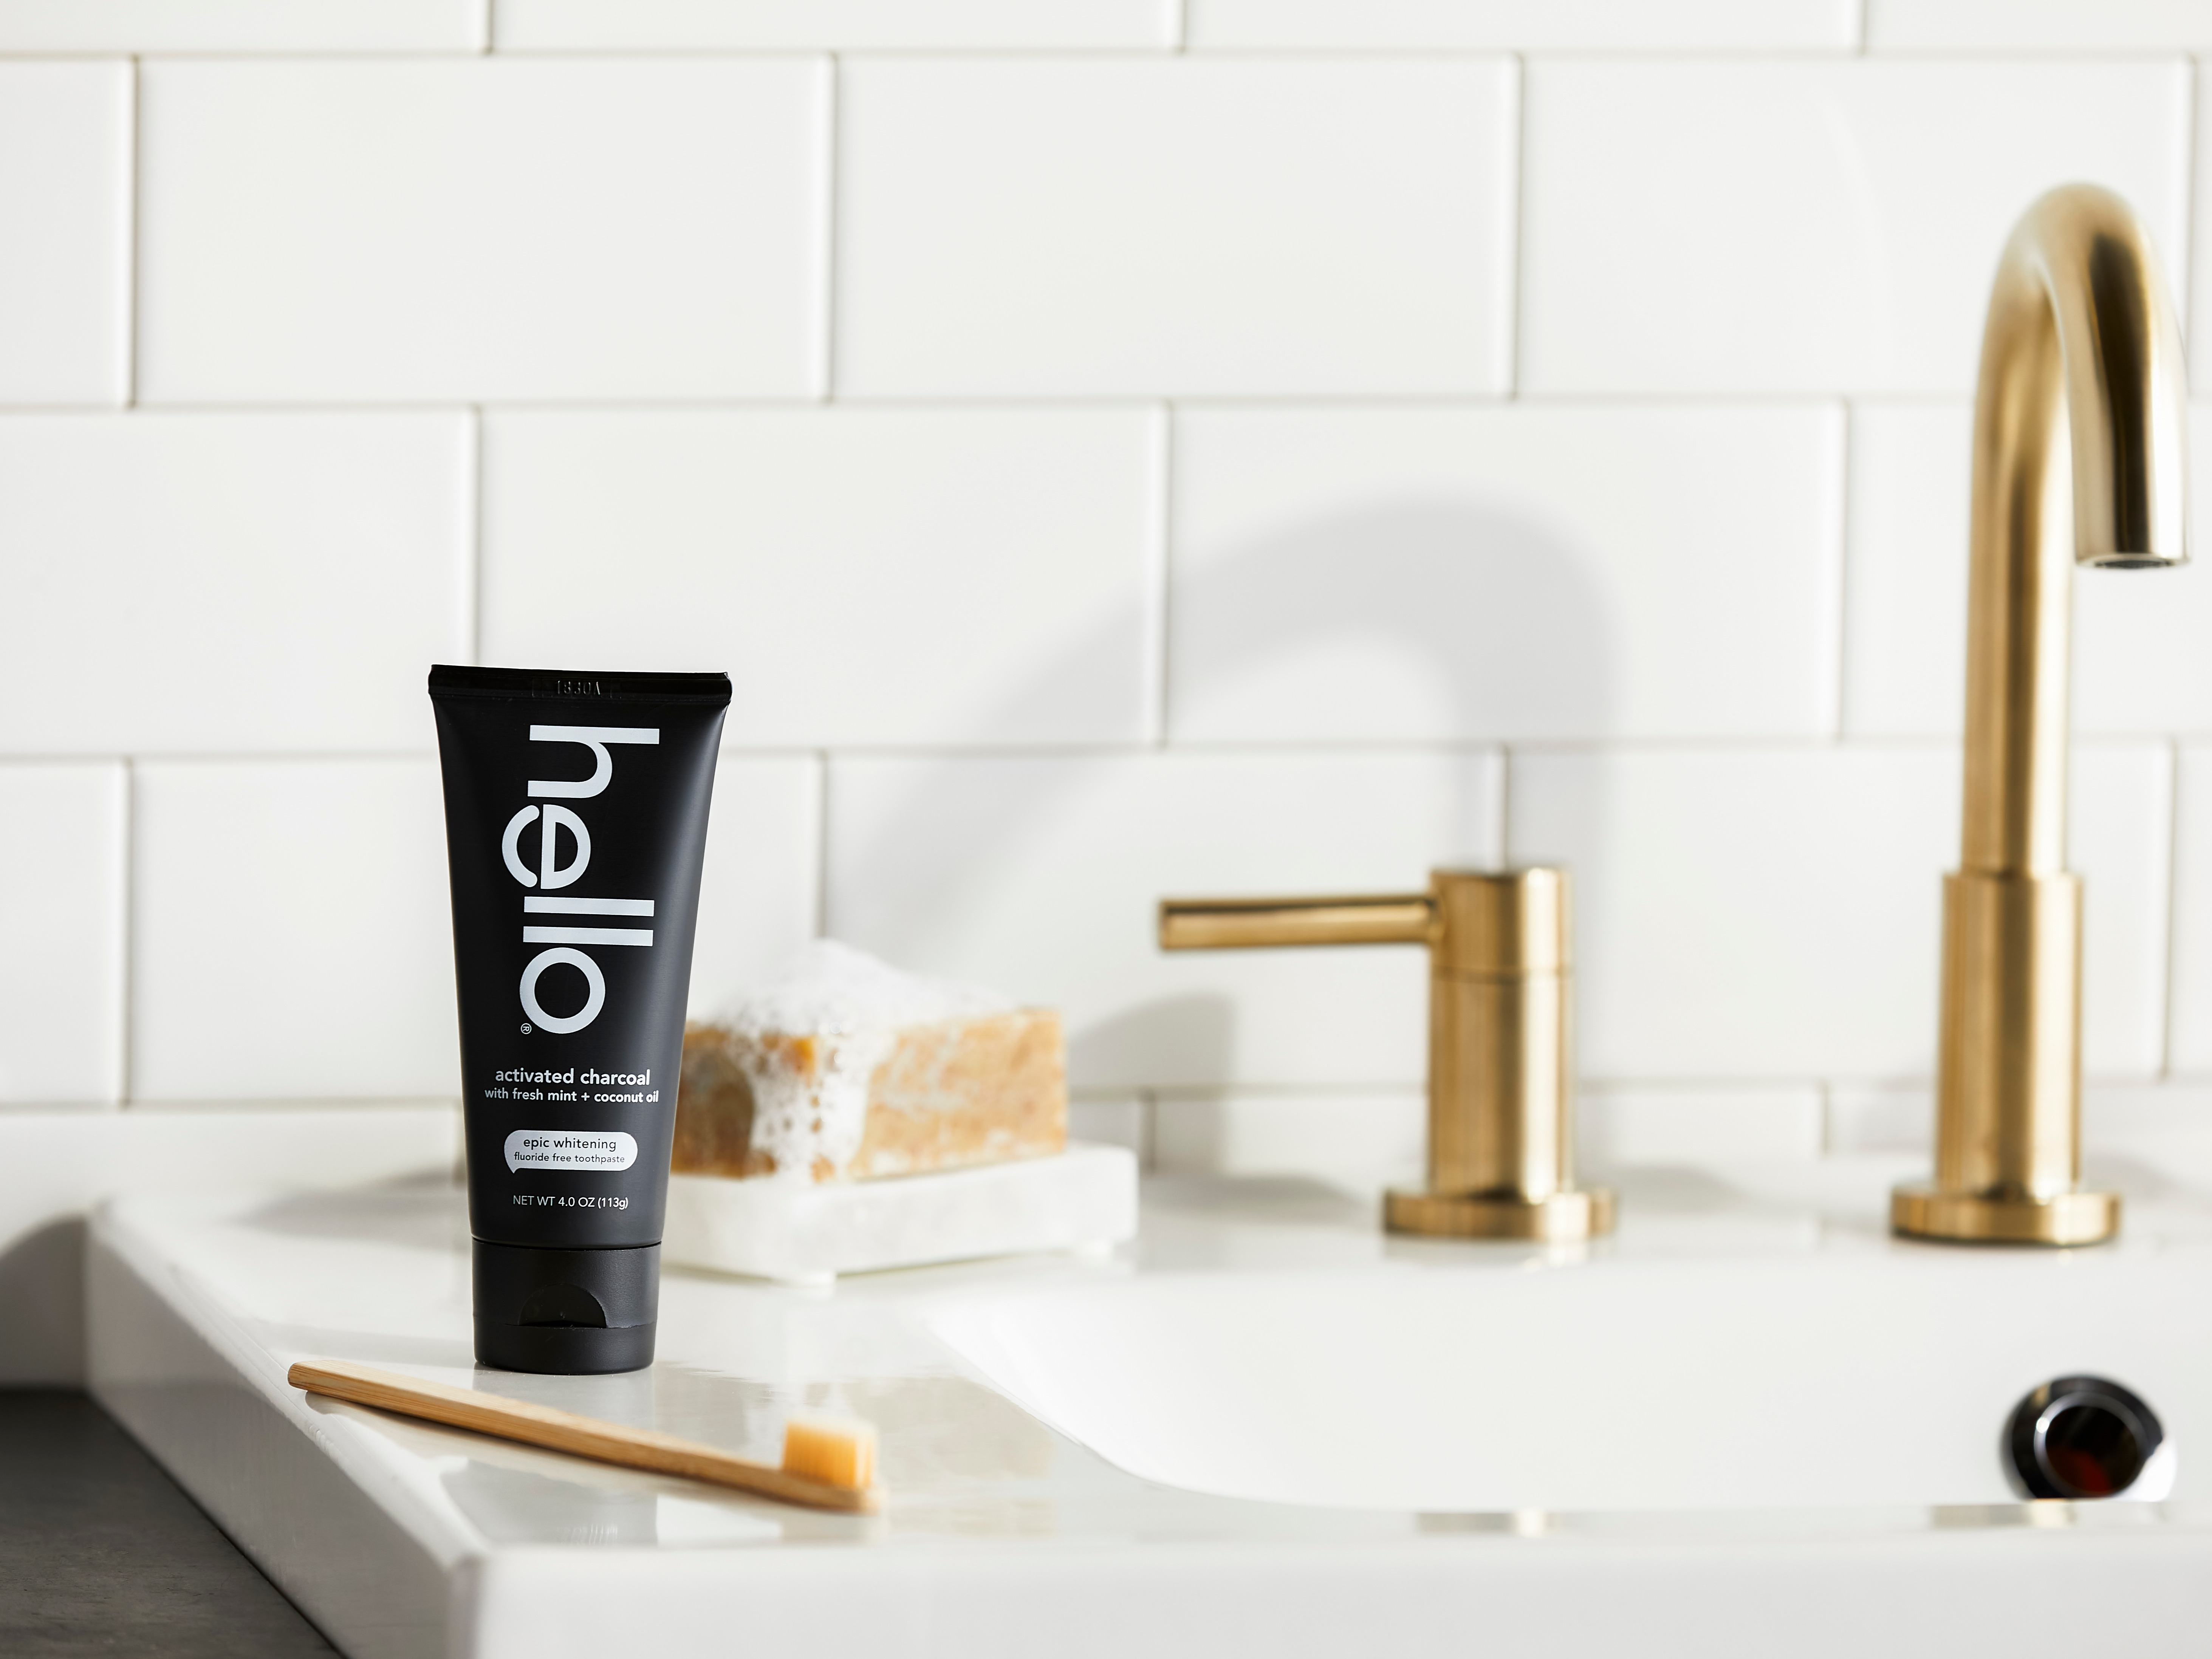 Image of hello Charcoal Toothpaste and bamboo toothbrush on side of sink with gold faucet